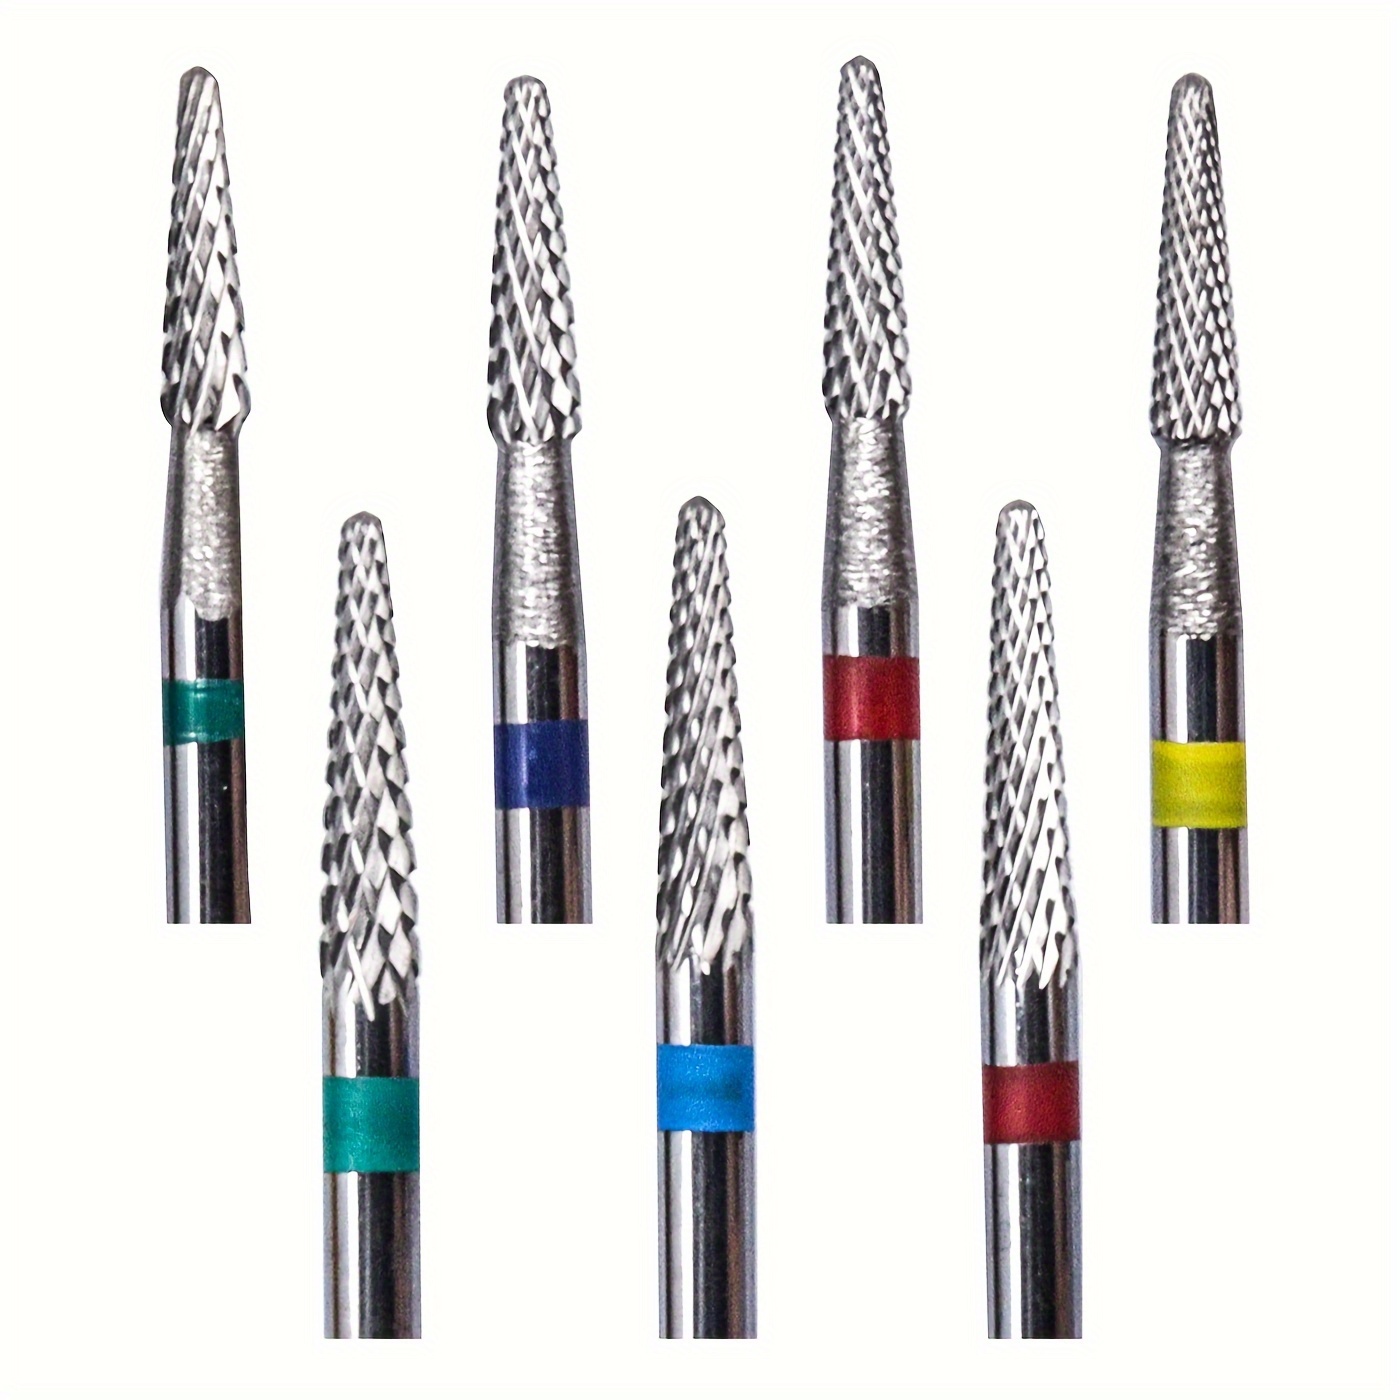 

Nail Drill Bits, Pedicure Carbide Milling Cutter For Nail Files, Manicure Cutter, Nail Art Tool